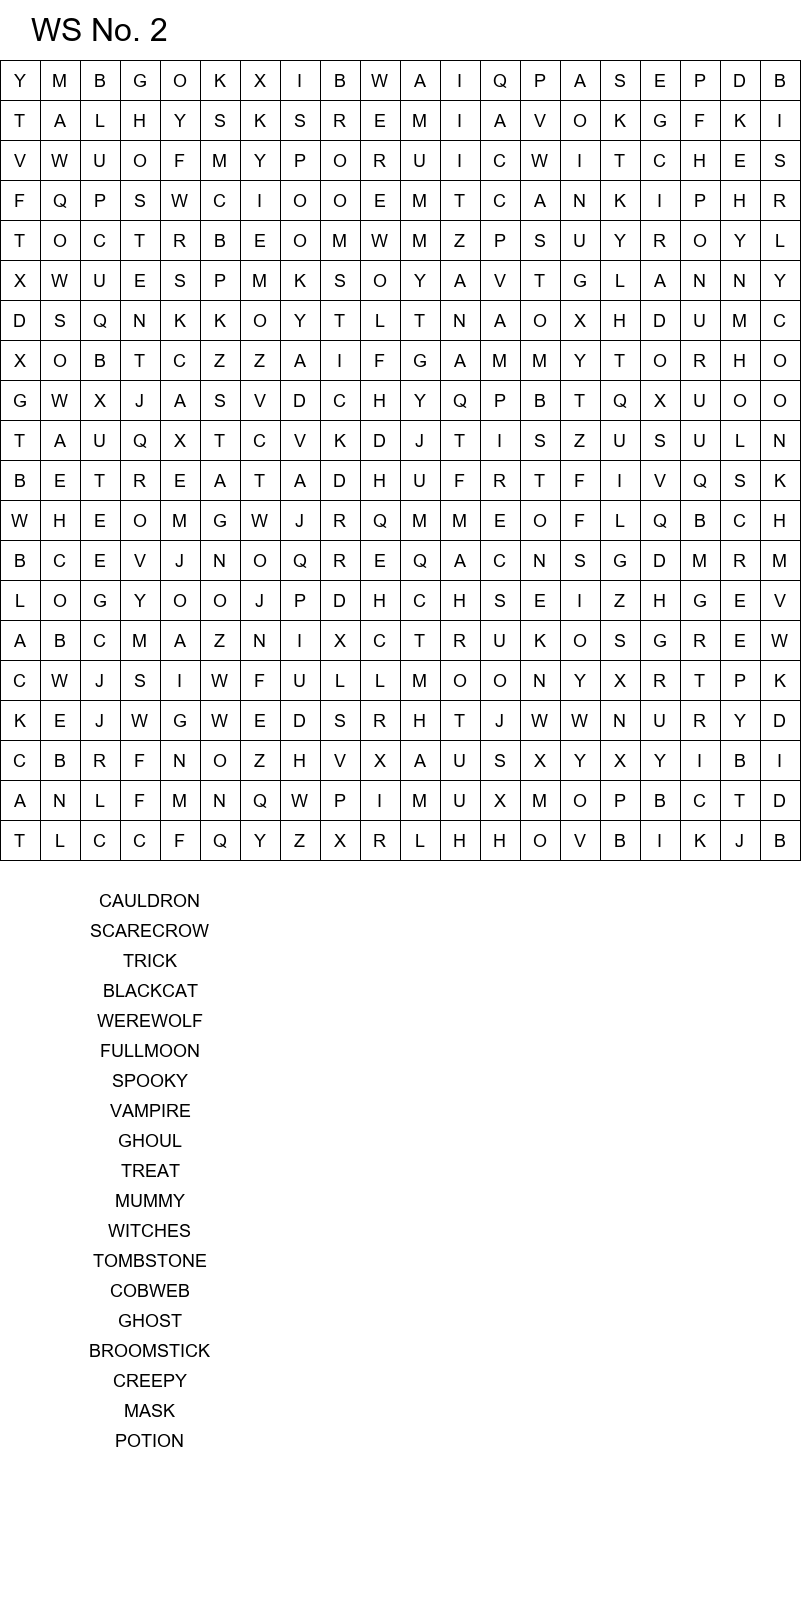 Challenging Halloween word search for teens size 20x20 No 2